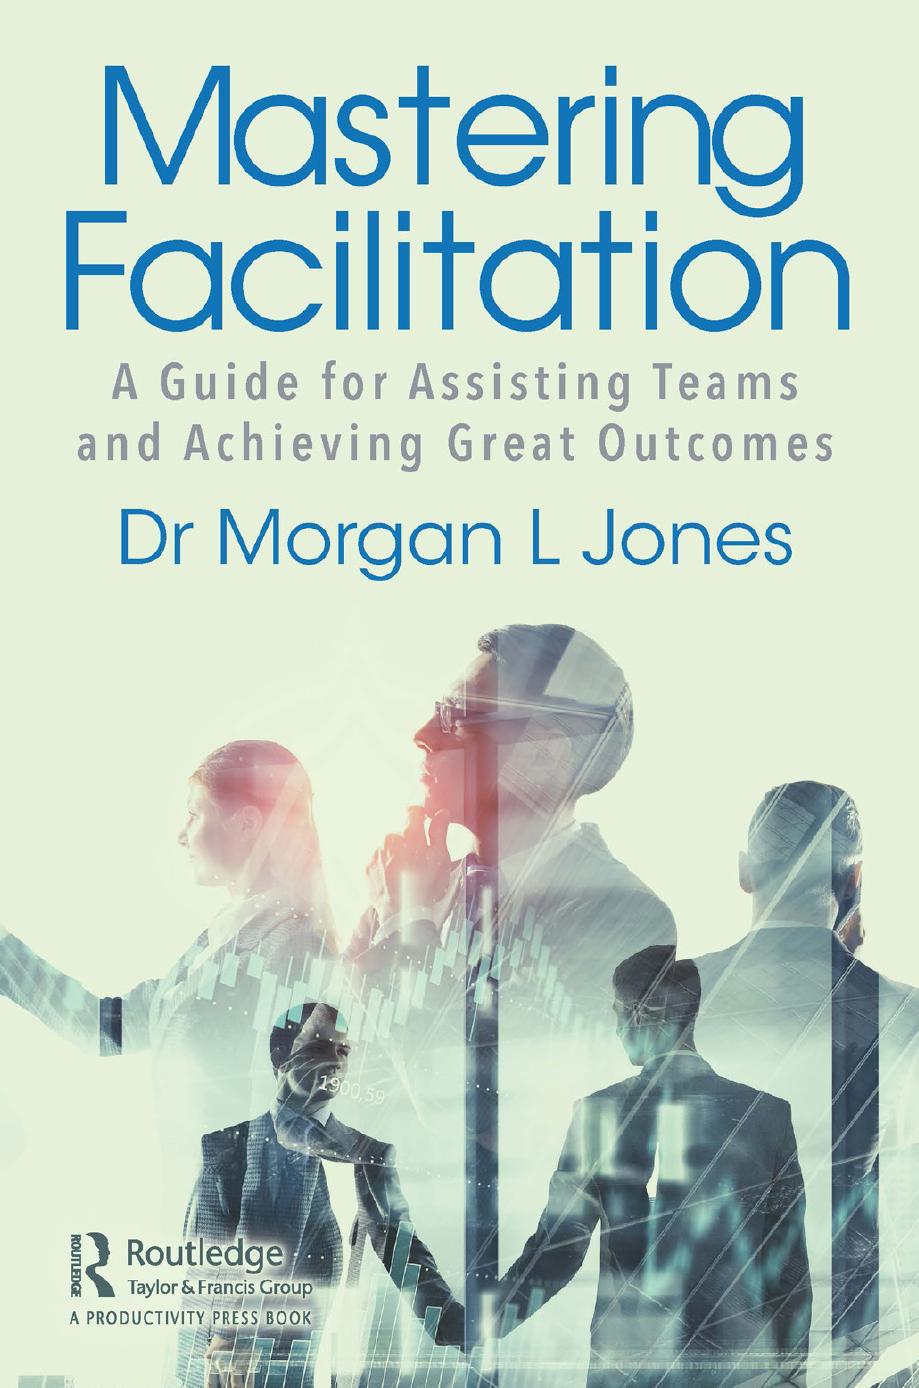 Mastering Facilitation: A Guide for Assisting Teams and Achieving Great Outcomes